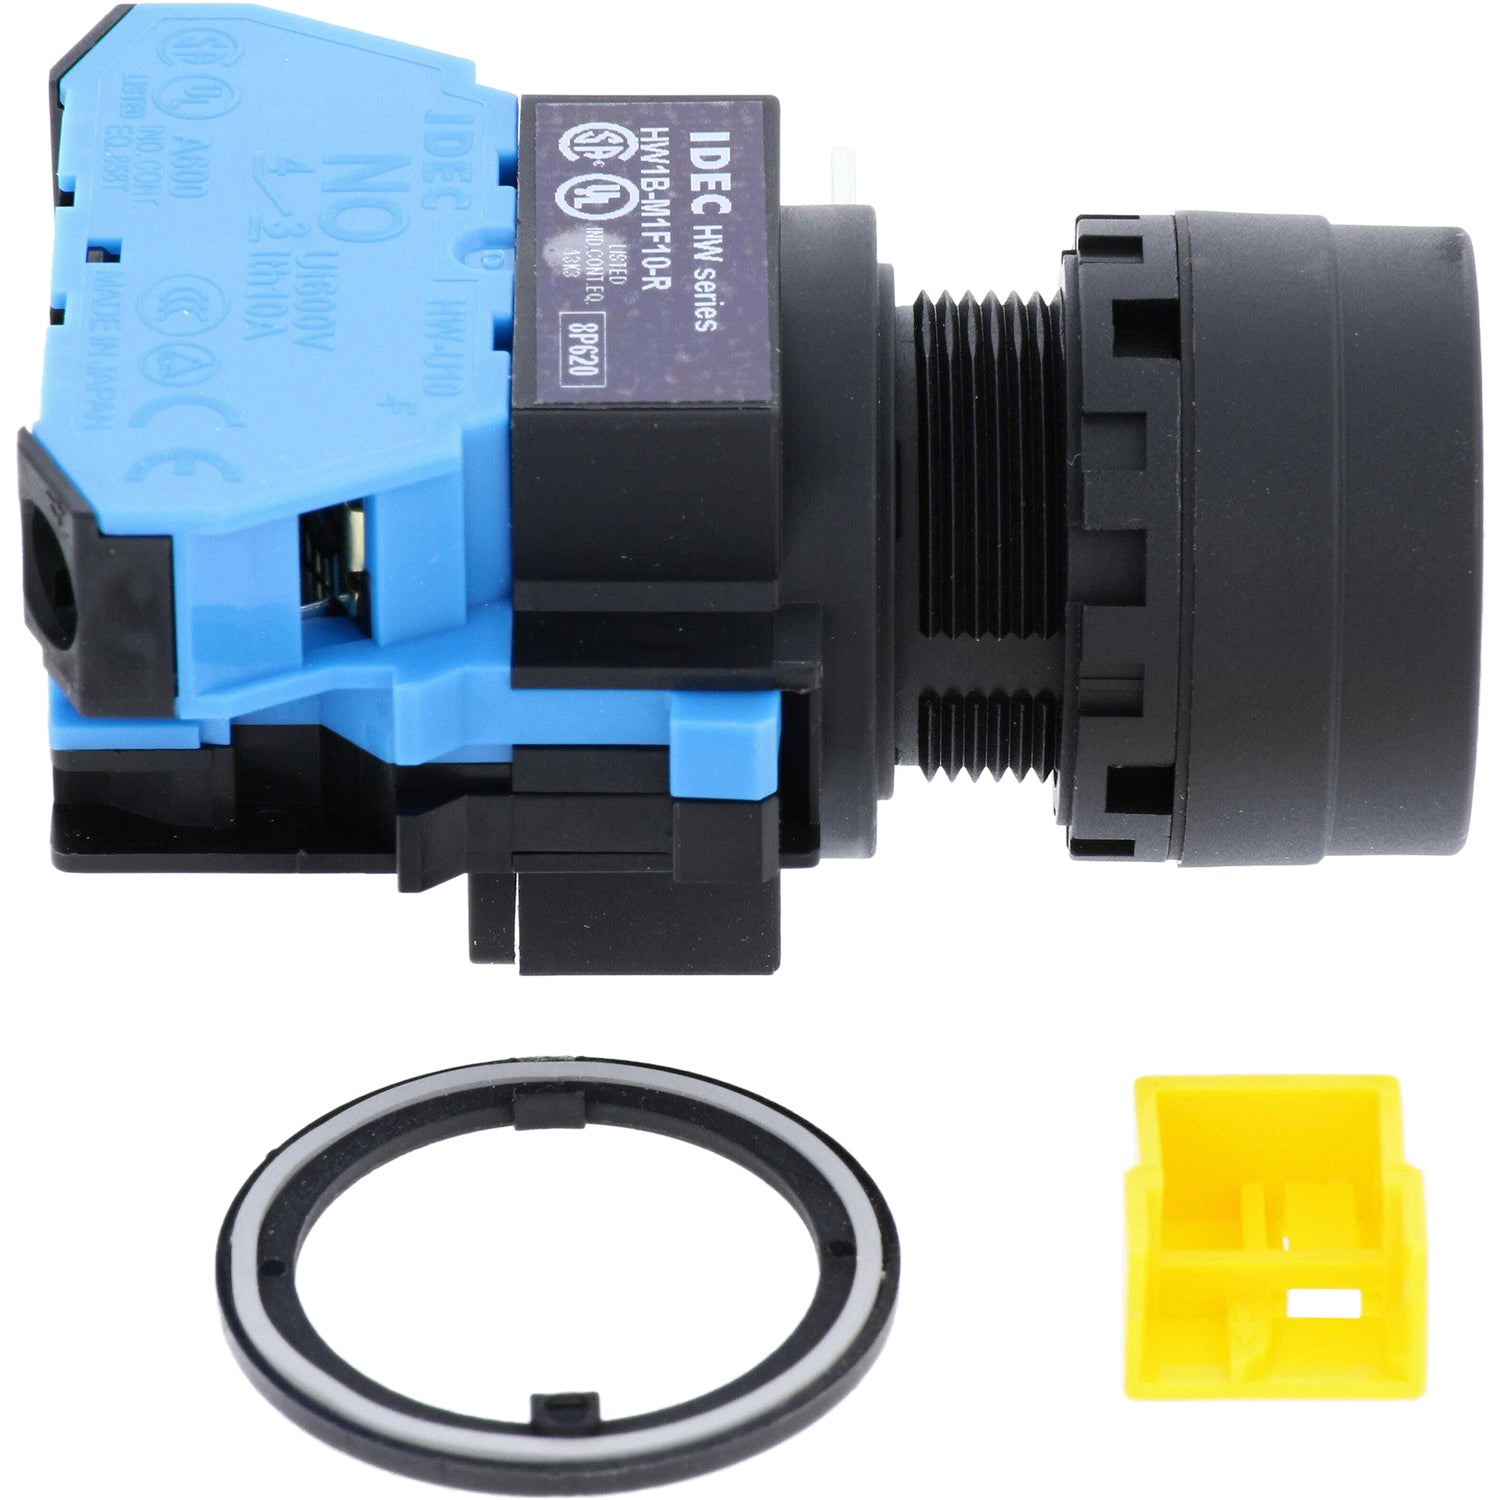 20mm red pushbutton on black and blue housing. Black and white retaining ring and a small, yellow, cube shaped connector cap are shown to the side of the push button. These parts are shown on a white background.